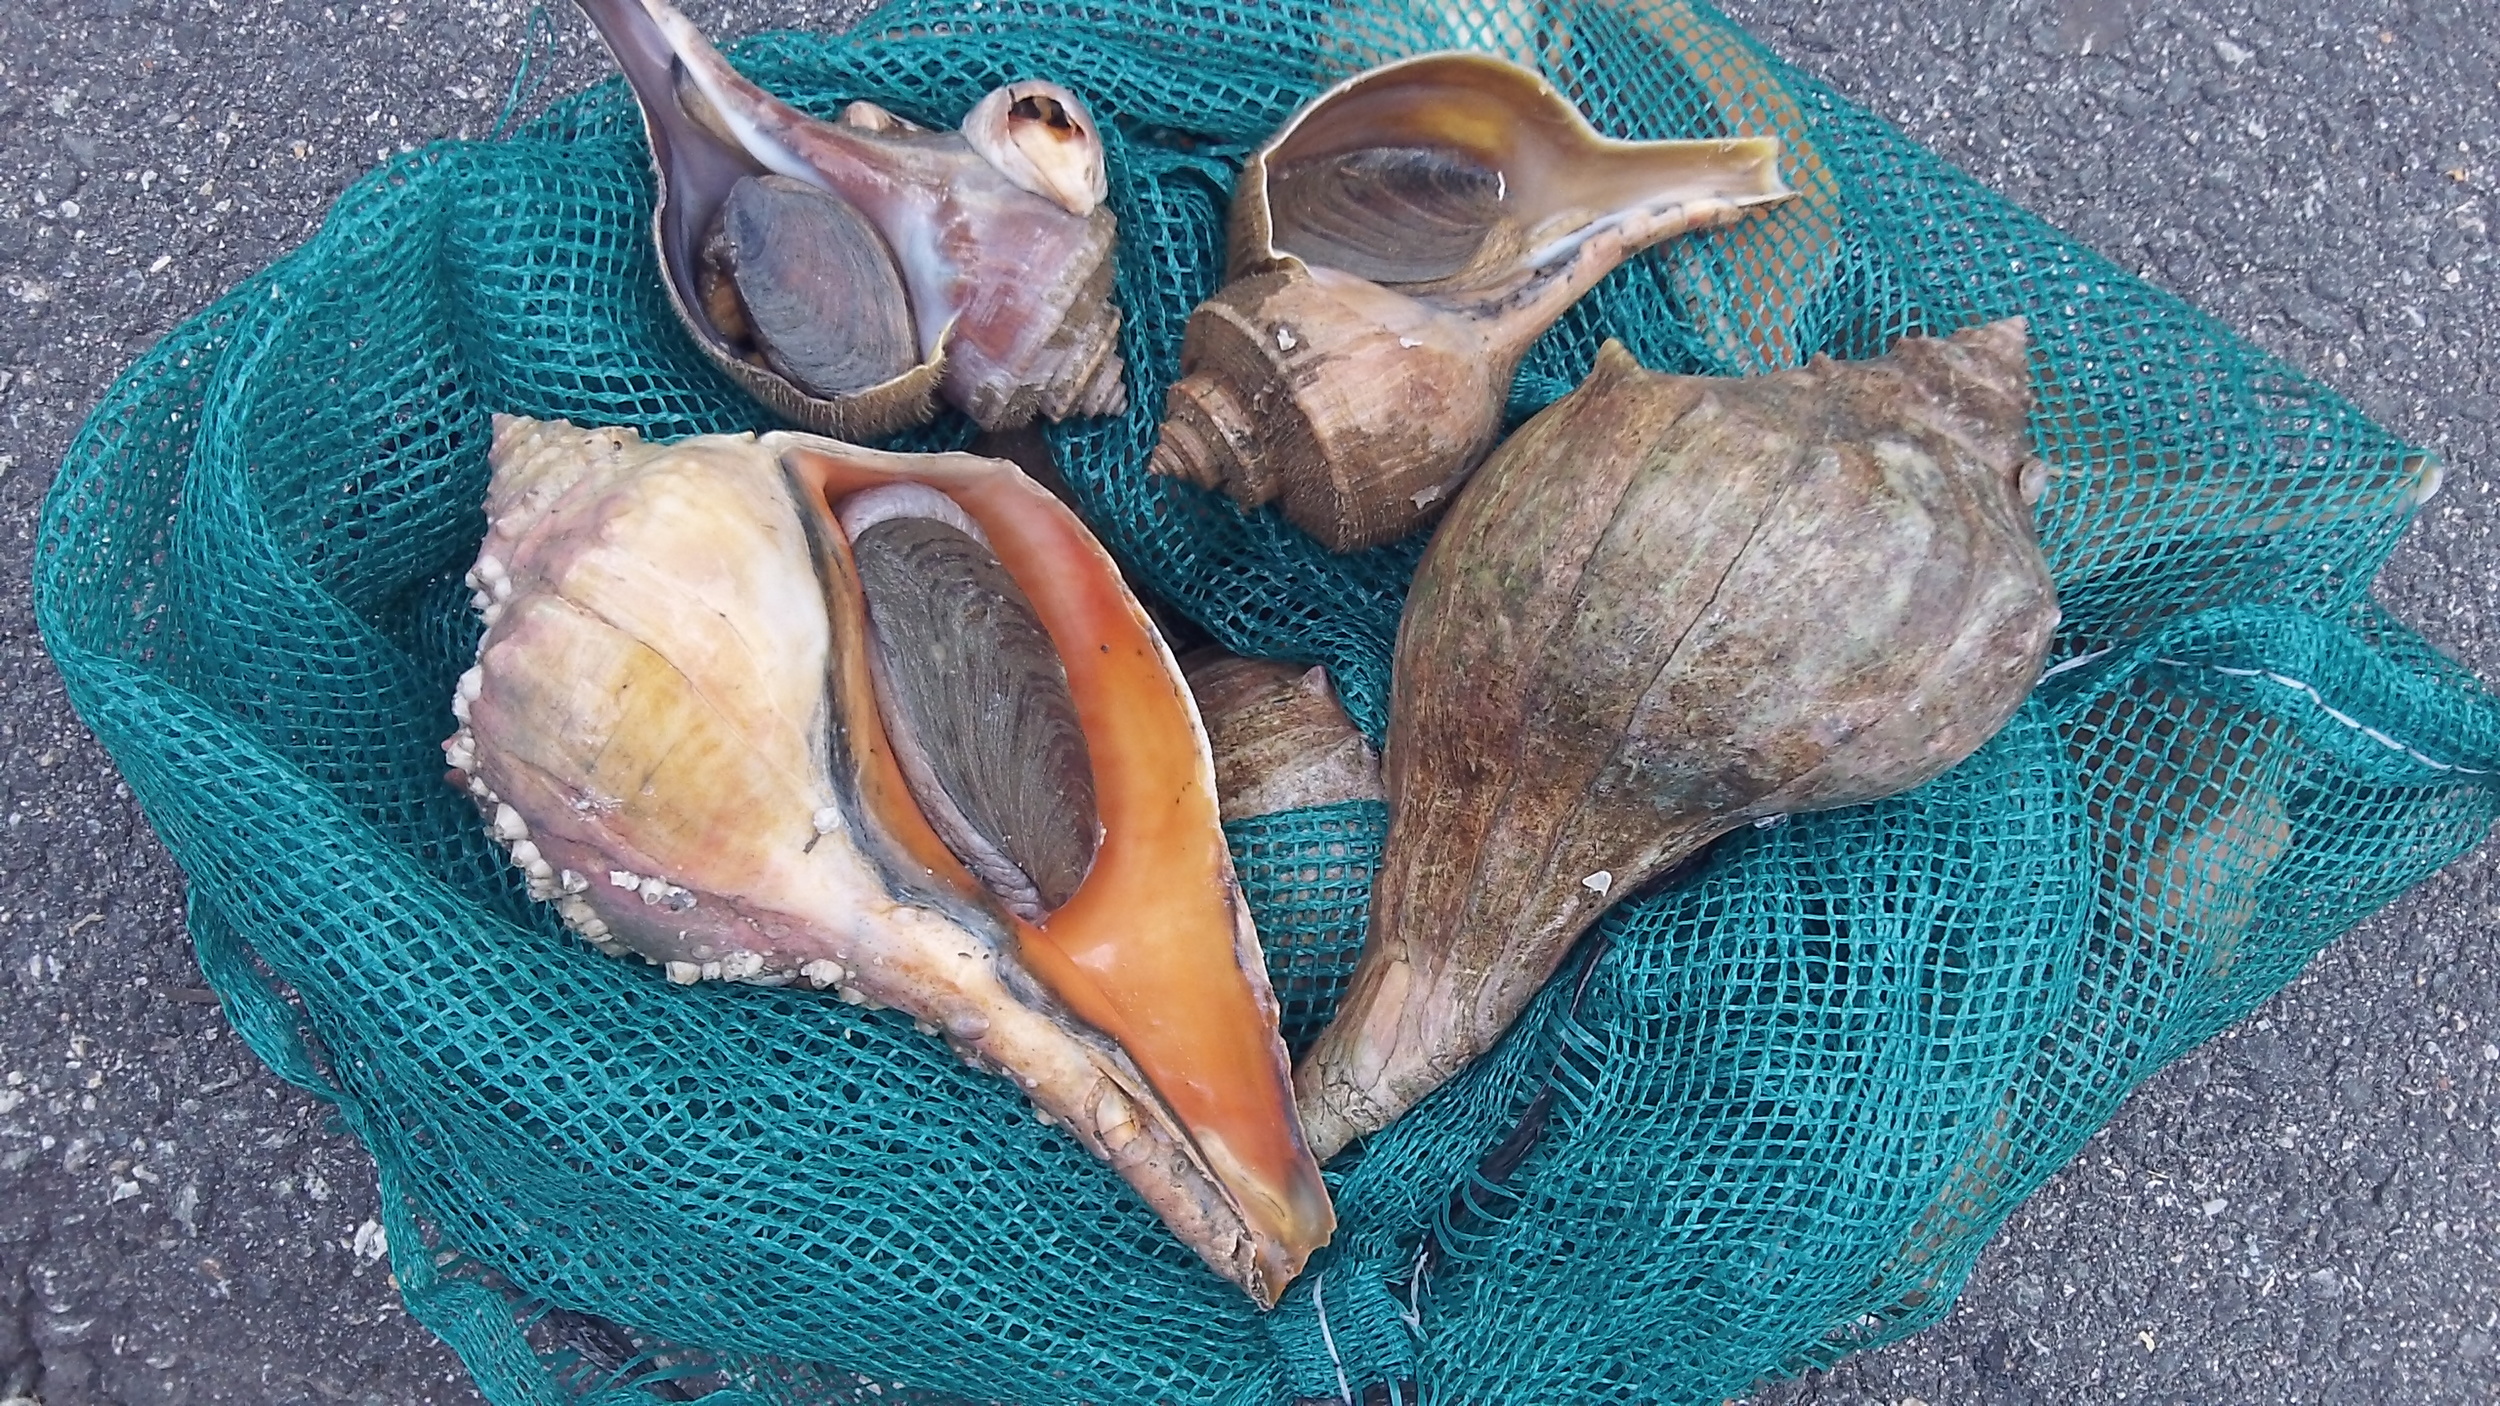 Conchs harvested by Dan and Katie Eagan of Bristol